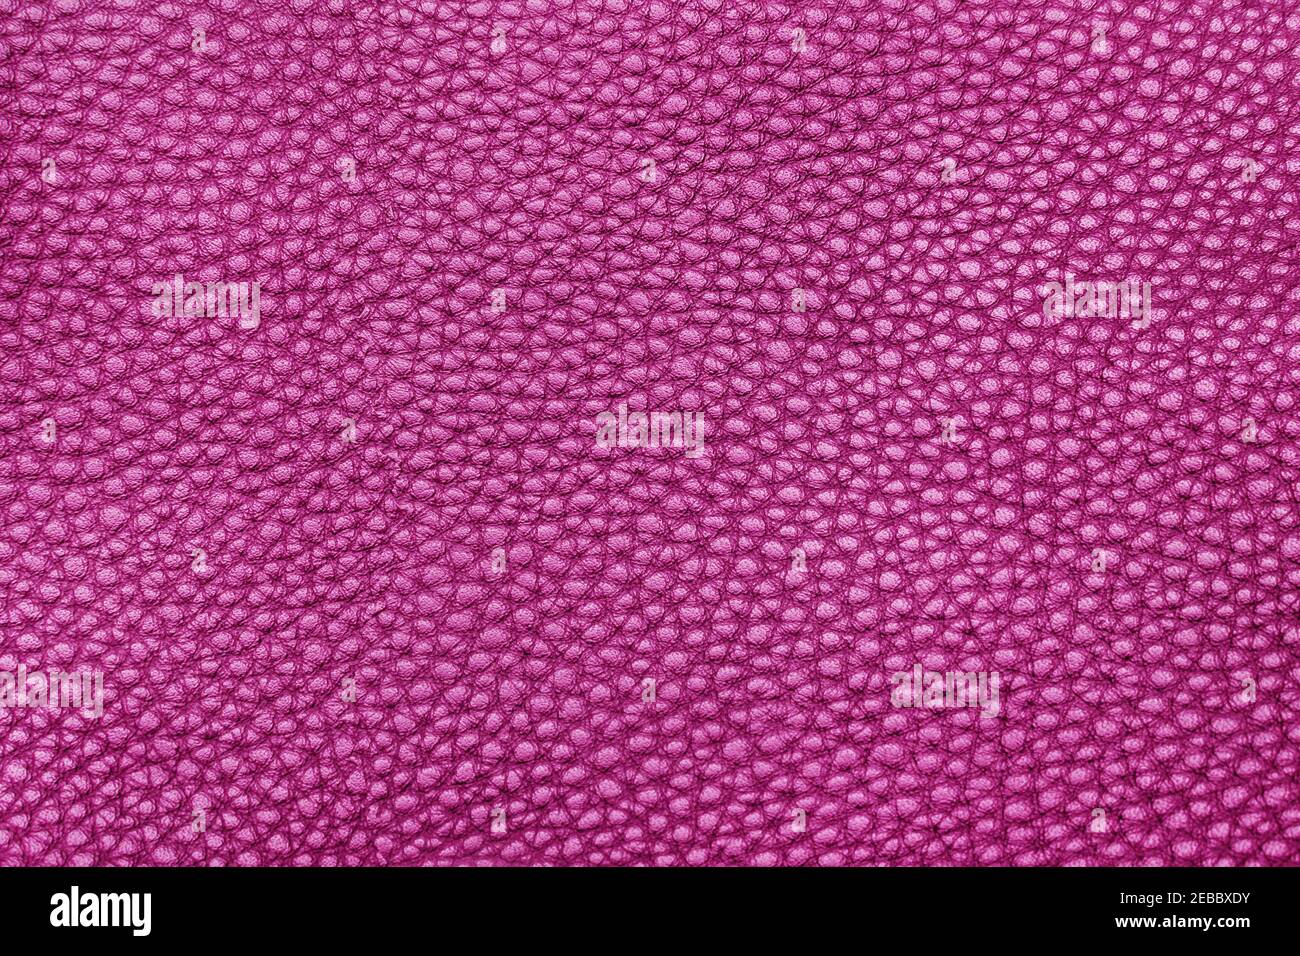 Purple leather as a textured background Stock Photo